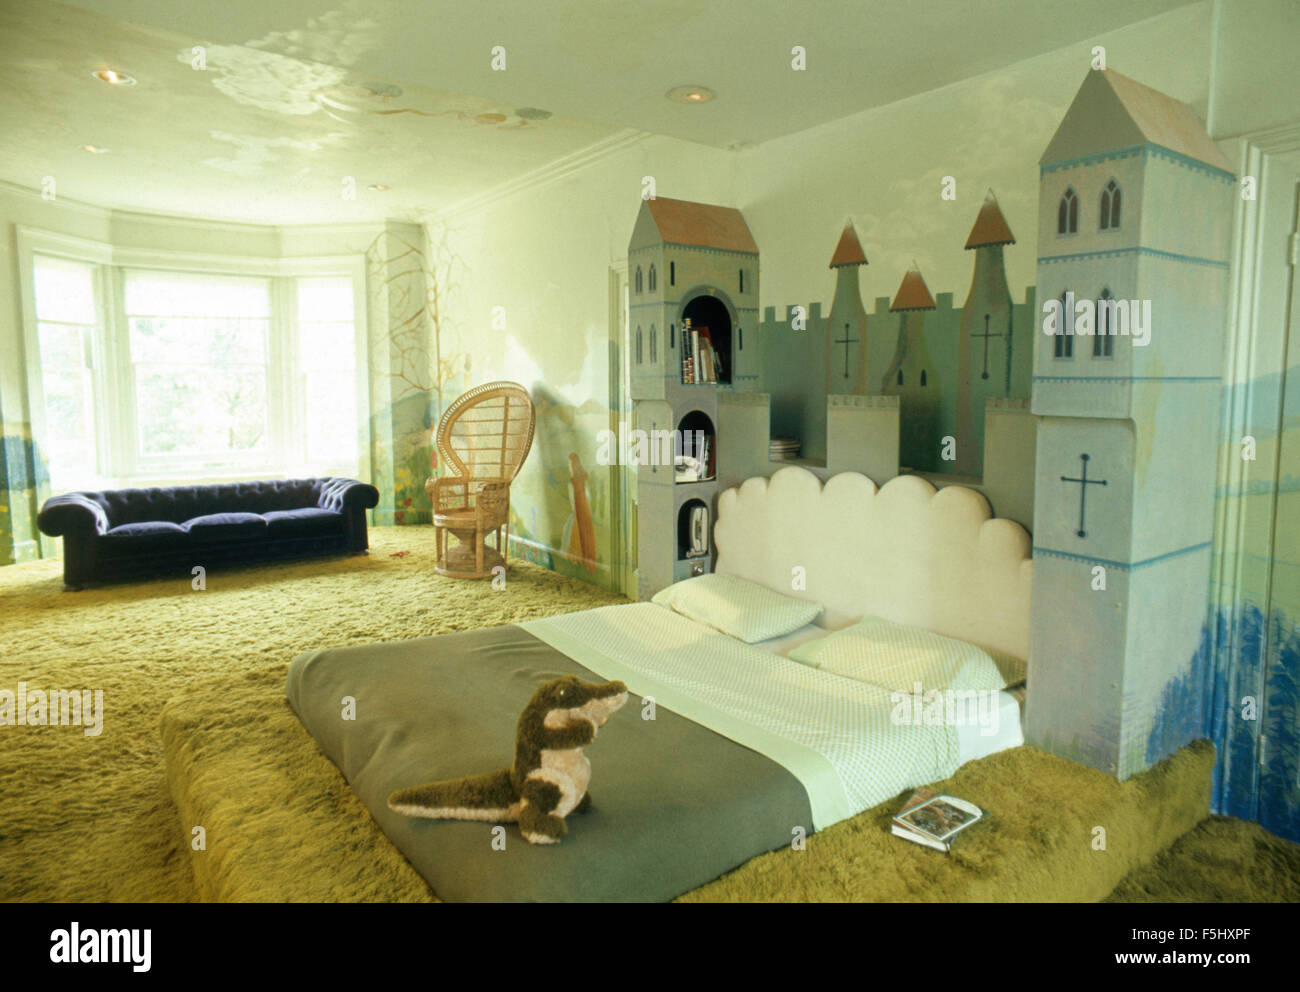 Castle themed bed in child's seventies bedroom with shag pile carpet Stock Photo